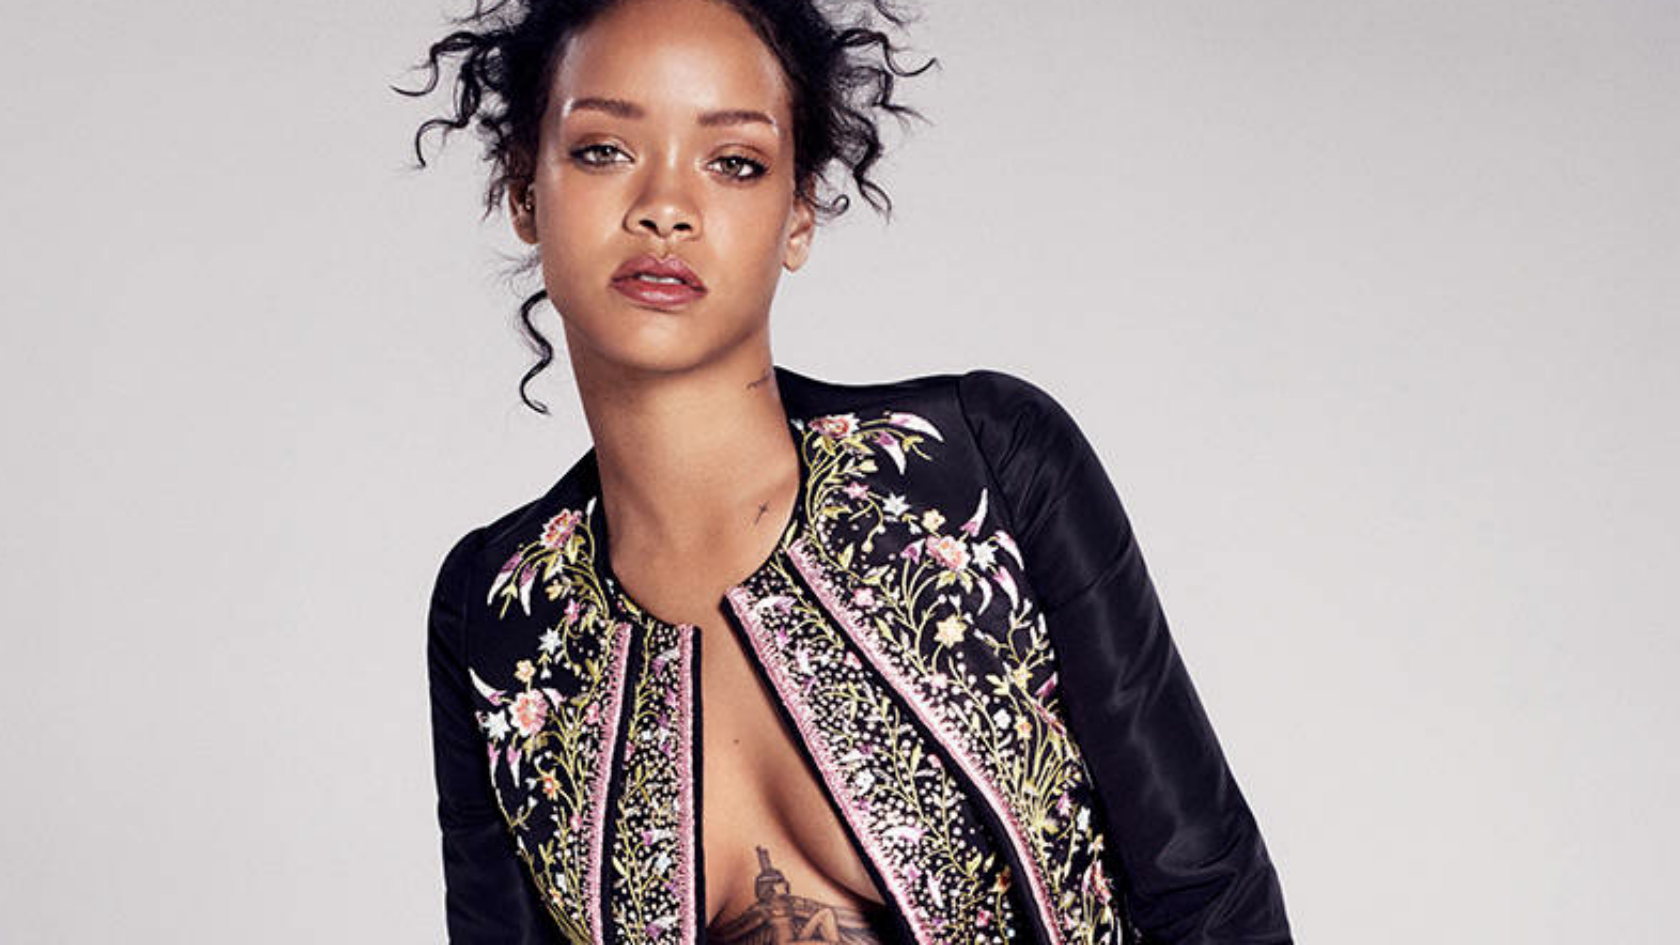 Rihanna S Risque Cover Shoot For Elle Magazine Lifewithoutandy